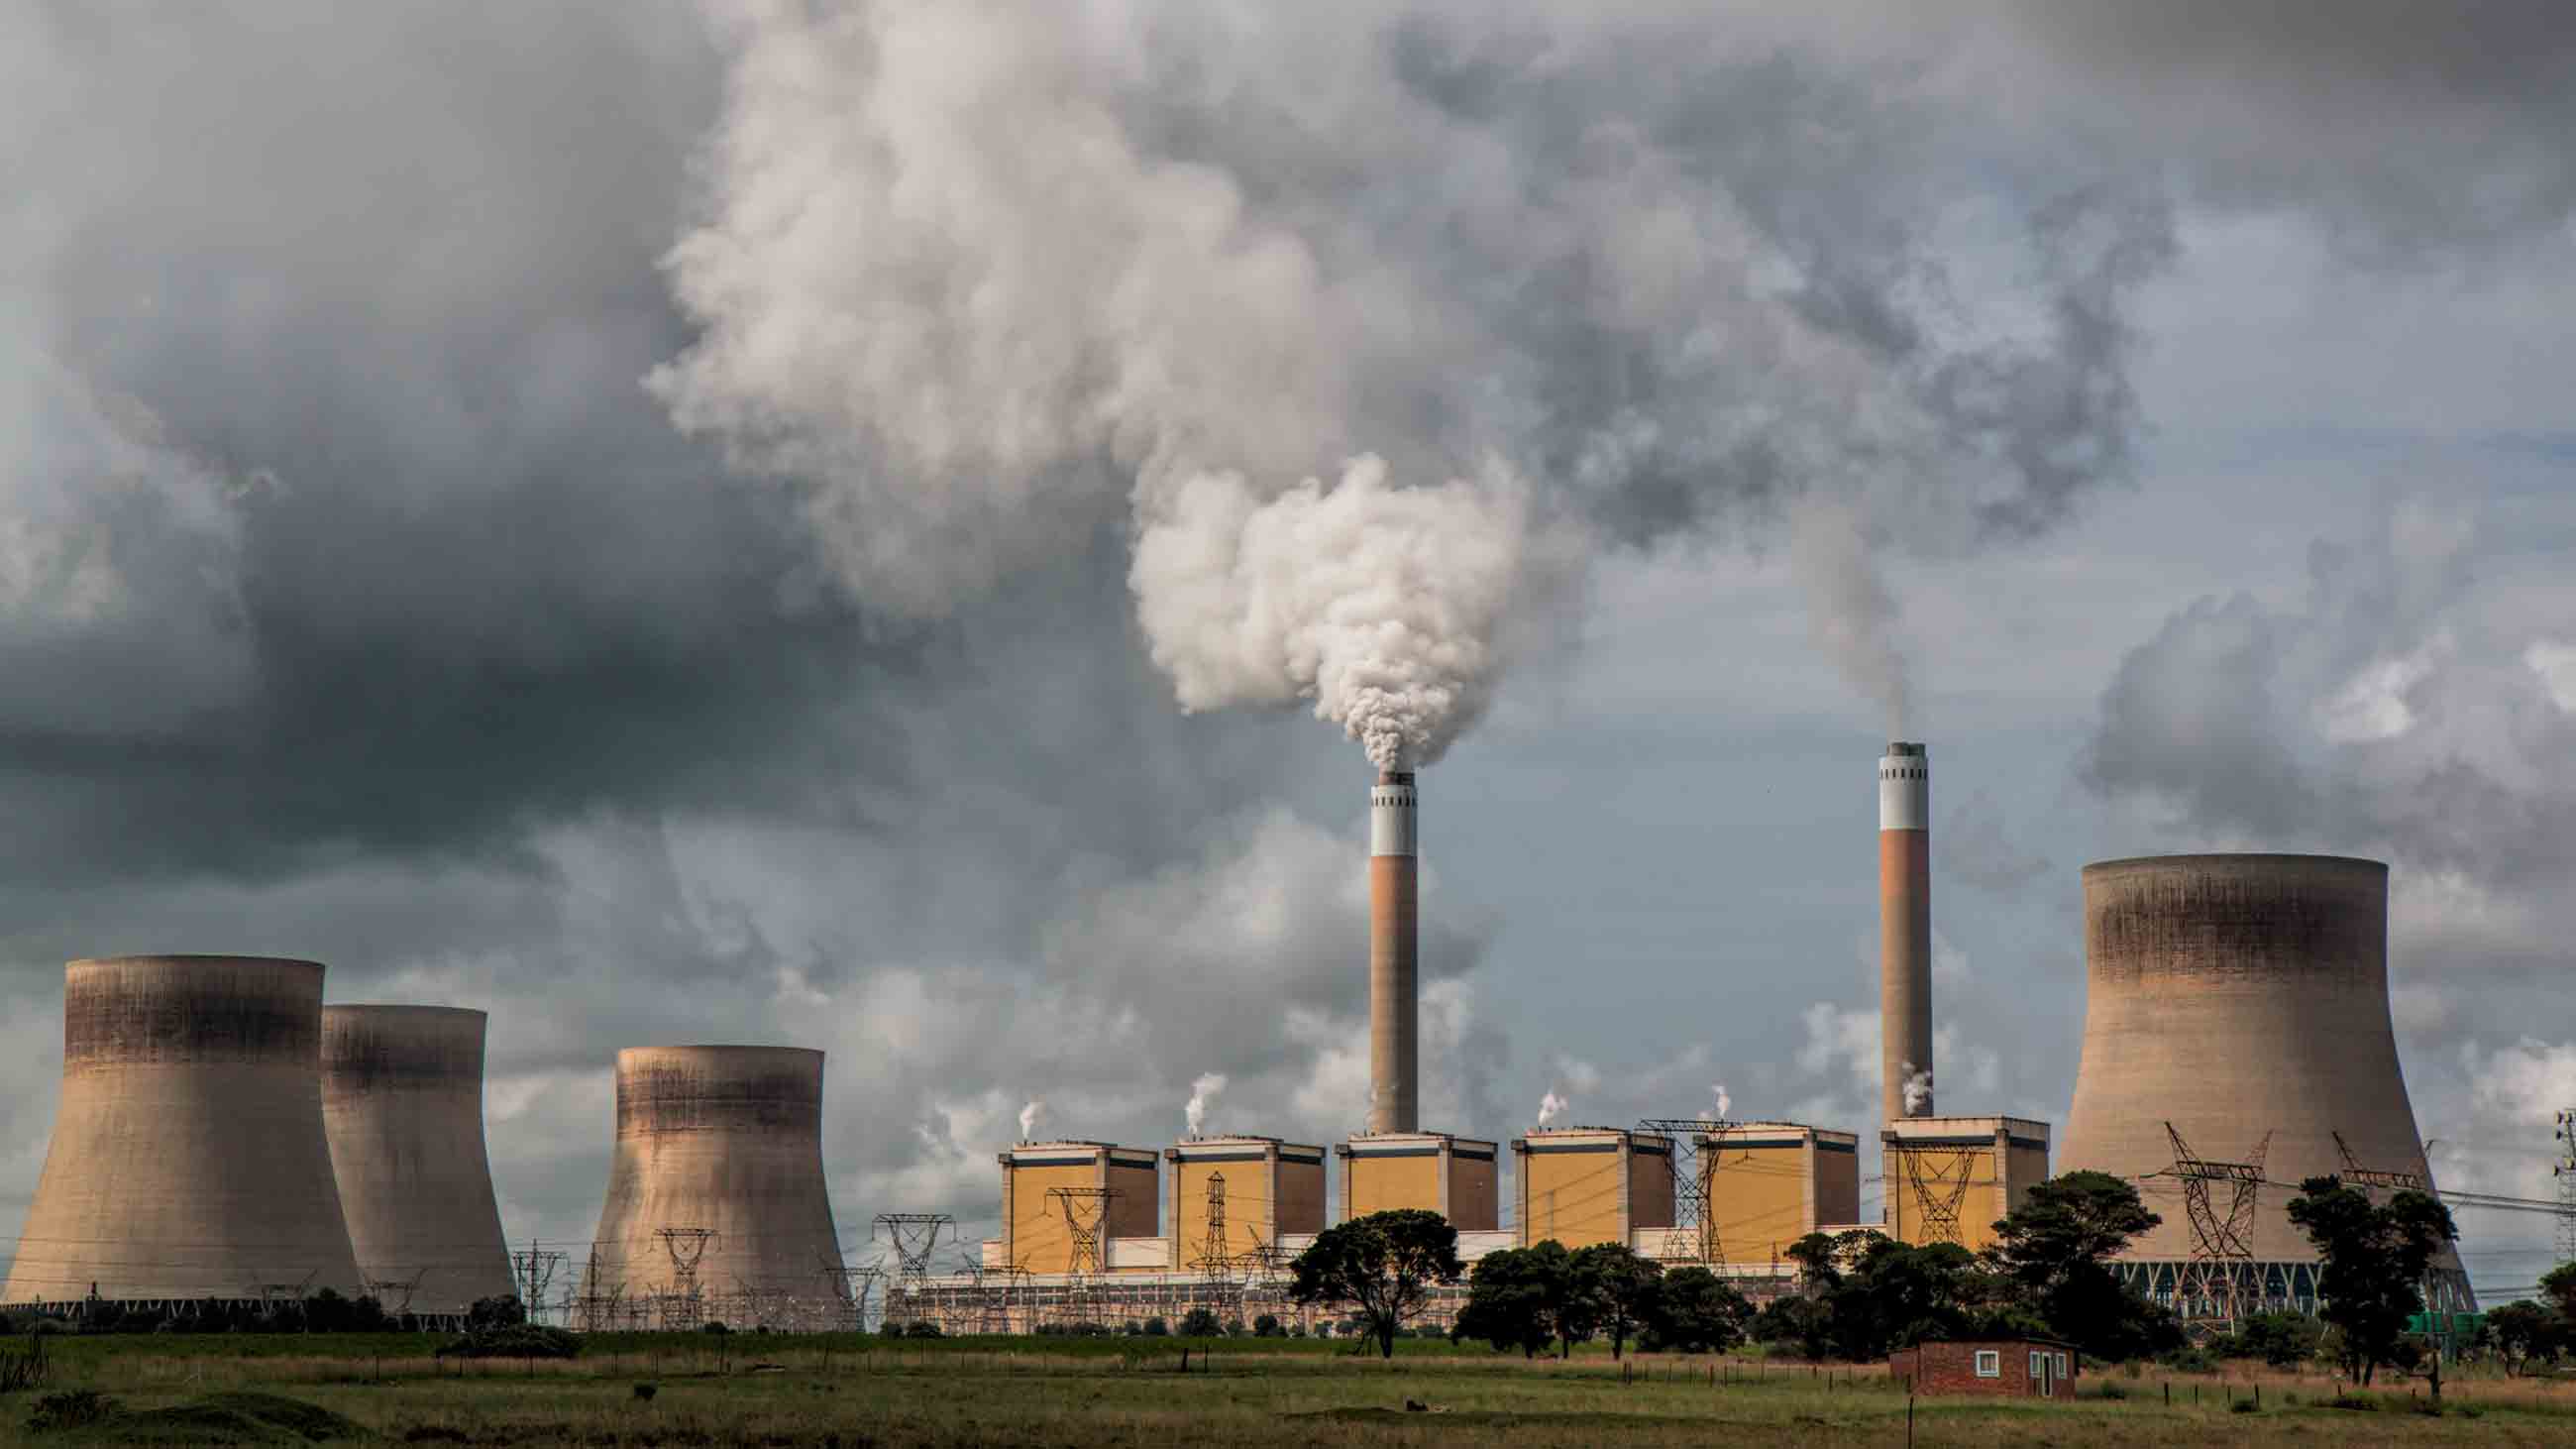 Nineteen countries have signed on to a pact to end coal use by 2030.